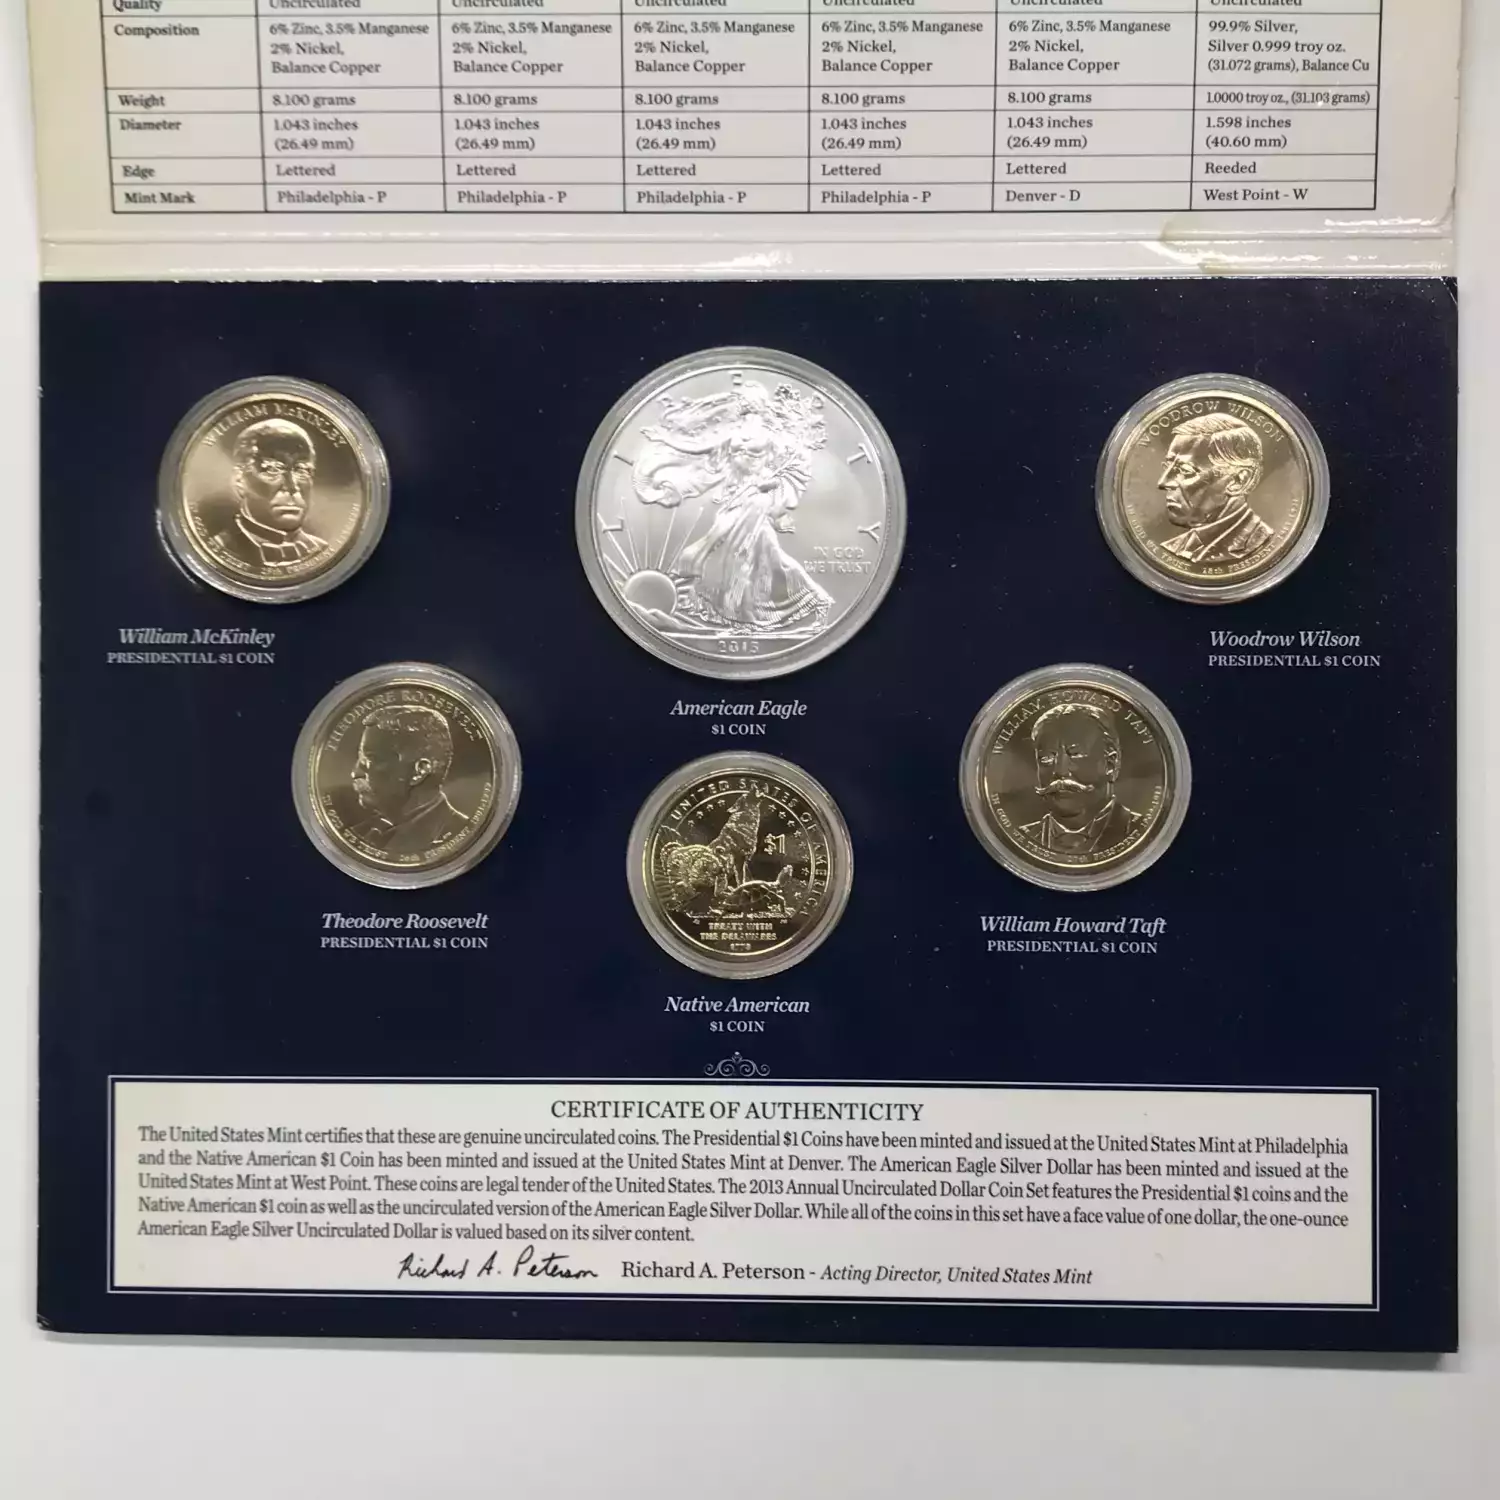 2013 Annual Uncirculated Dollar Coin Set incl W Burnished Silver Eagle - US Mint